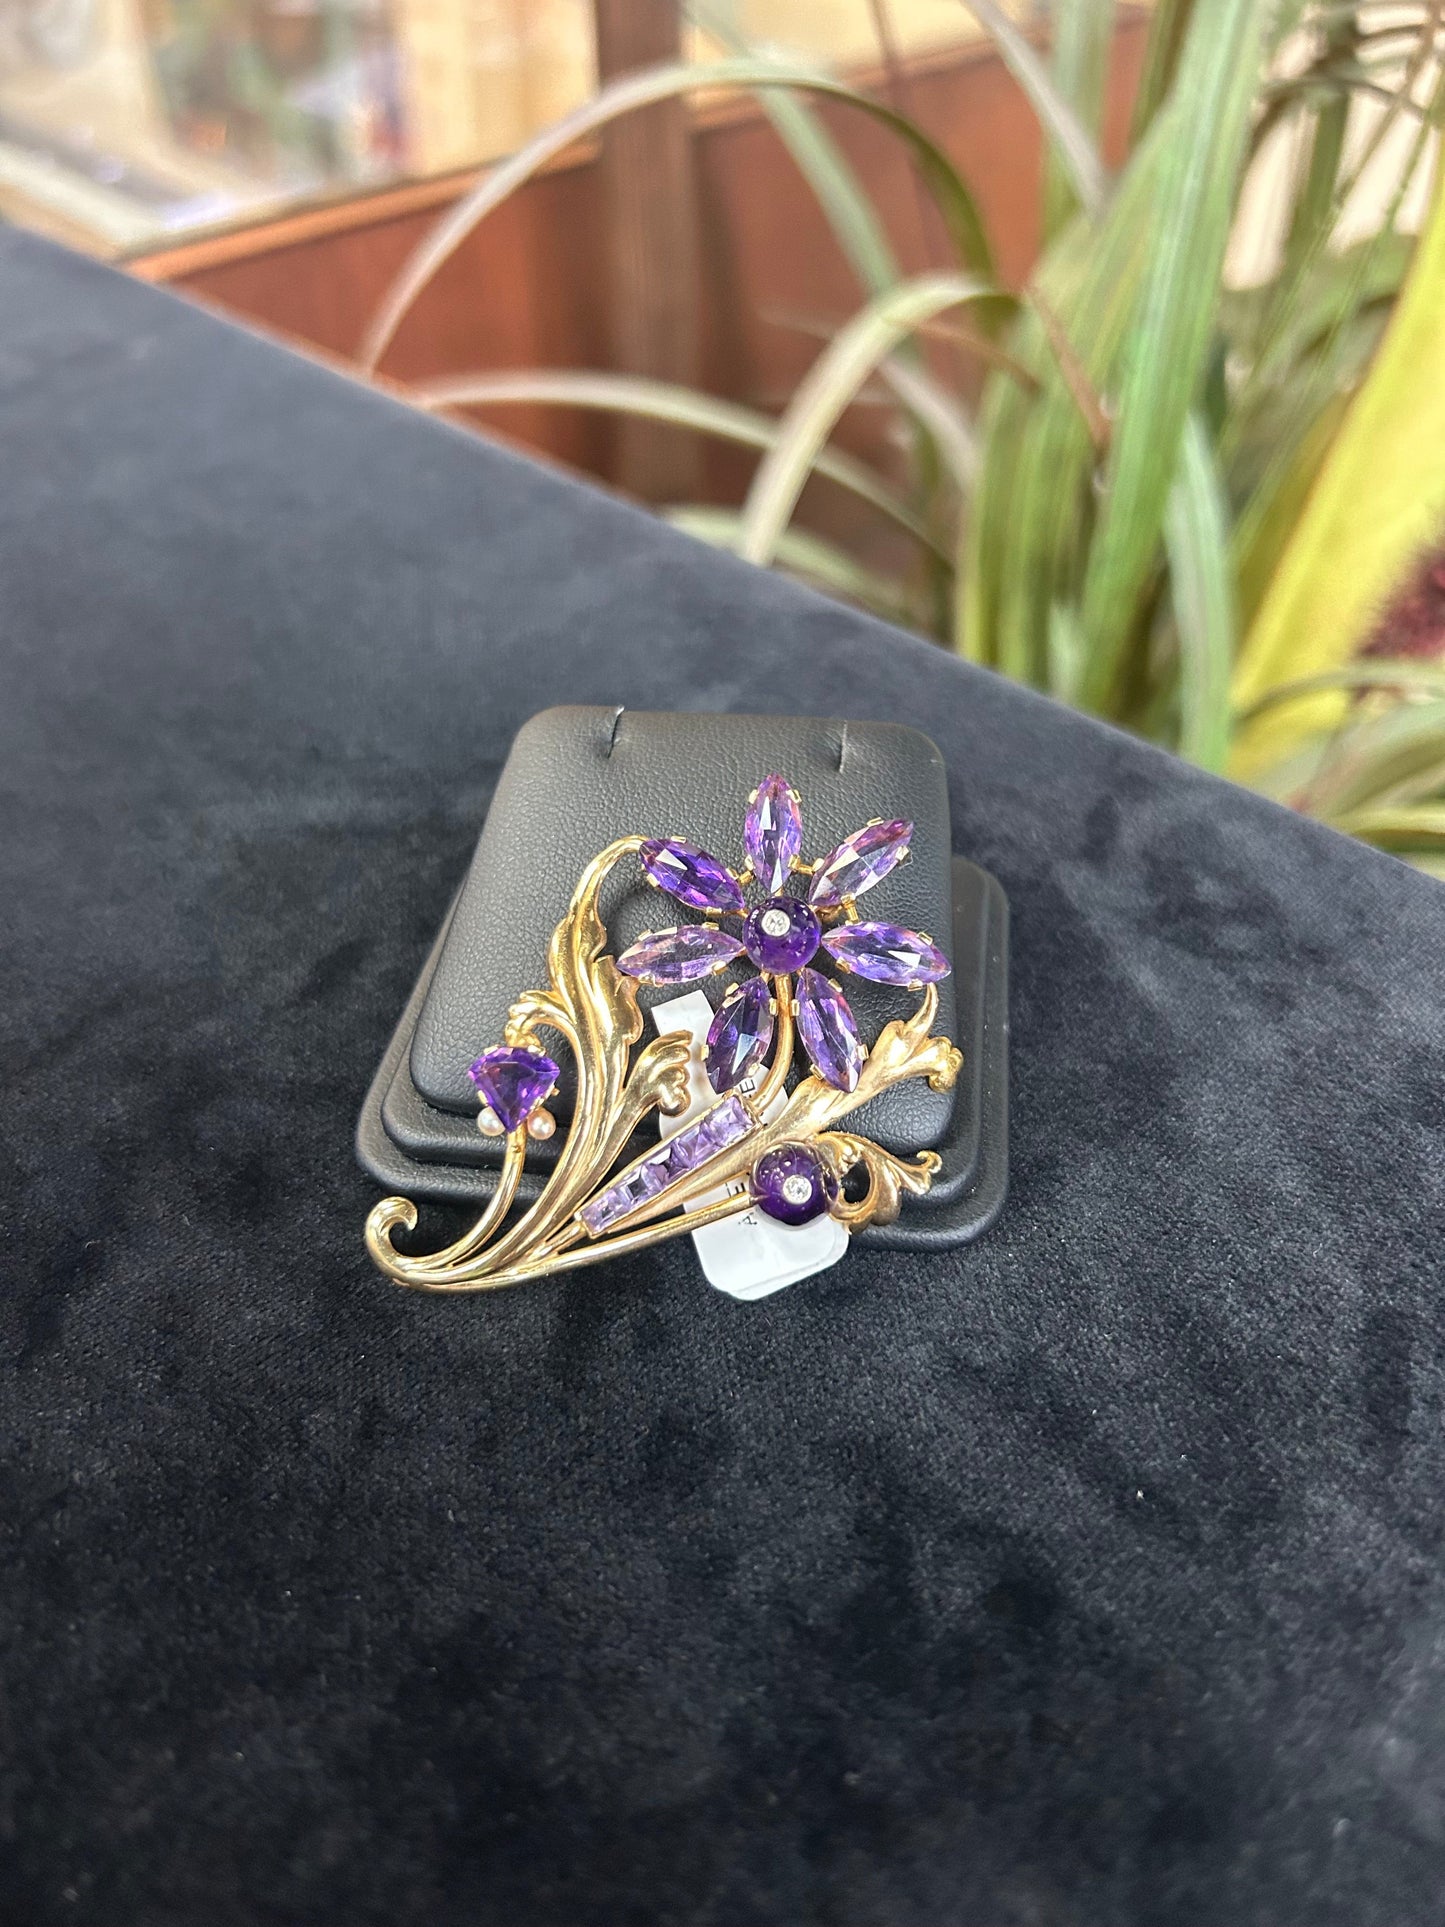 a close up of a cell phone with a flower on it